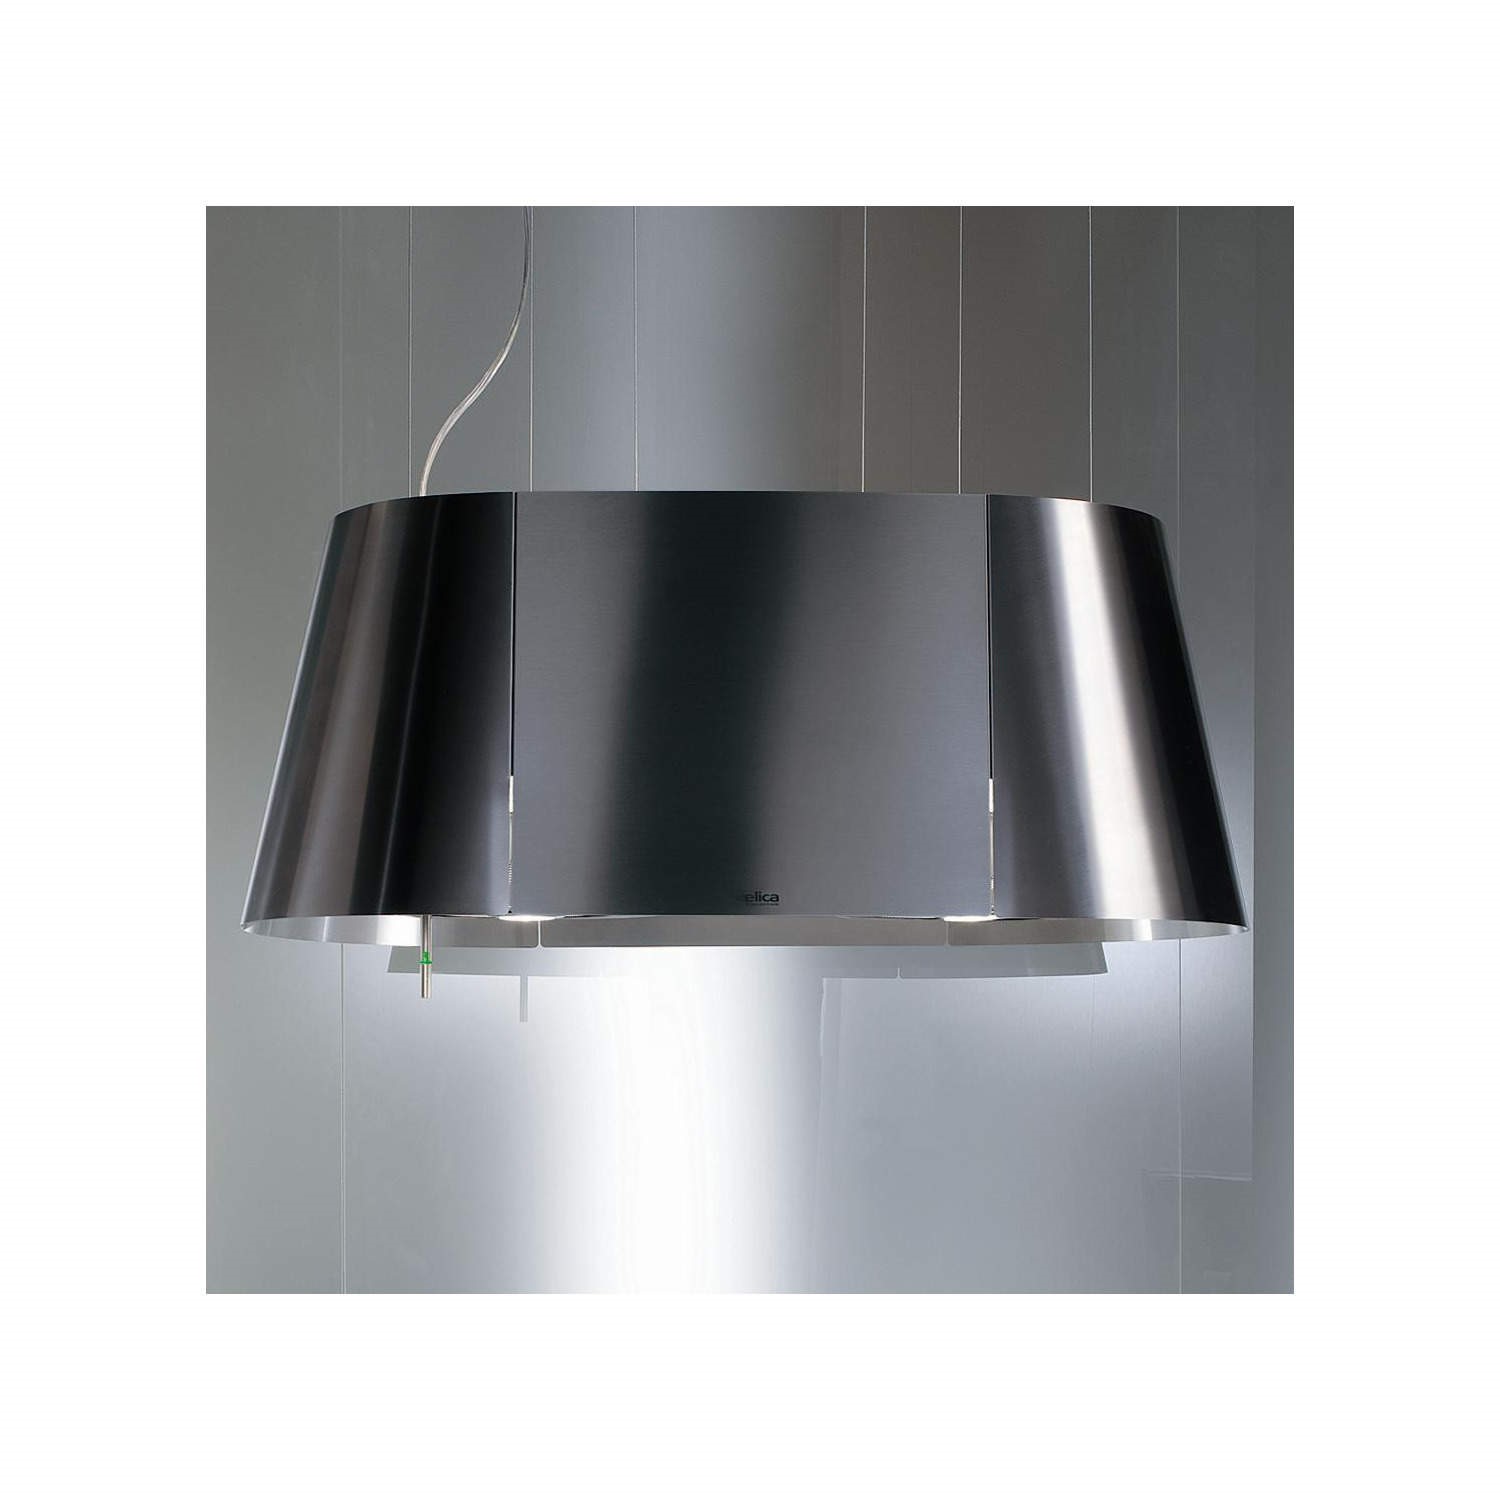 Elica Tandem Ceiling Mounted 90cm Island Cooker Hood Stainless